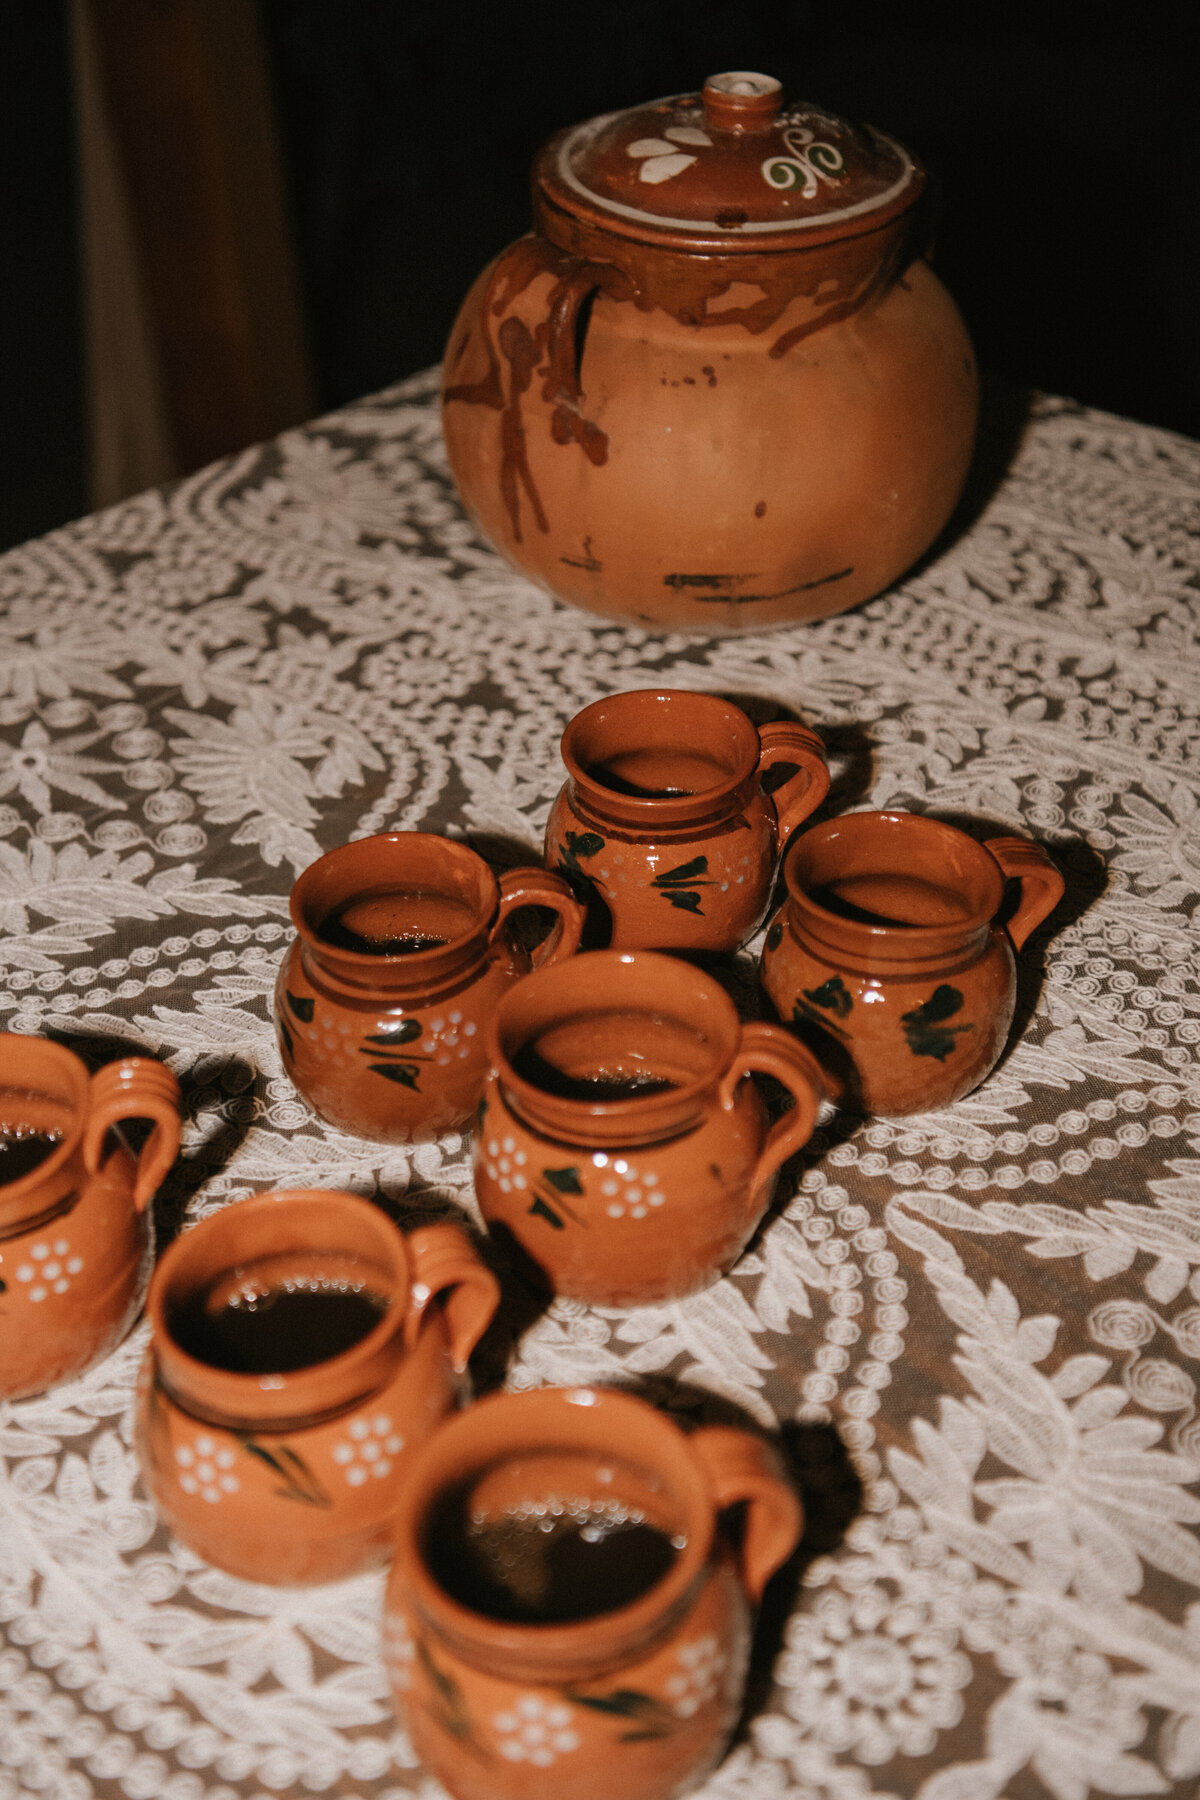 use of cultural mexican pottery for mexican hot chocolate during late night bites at high end destination wedding.